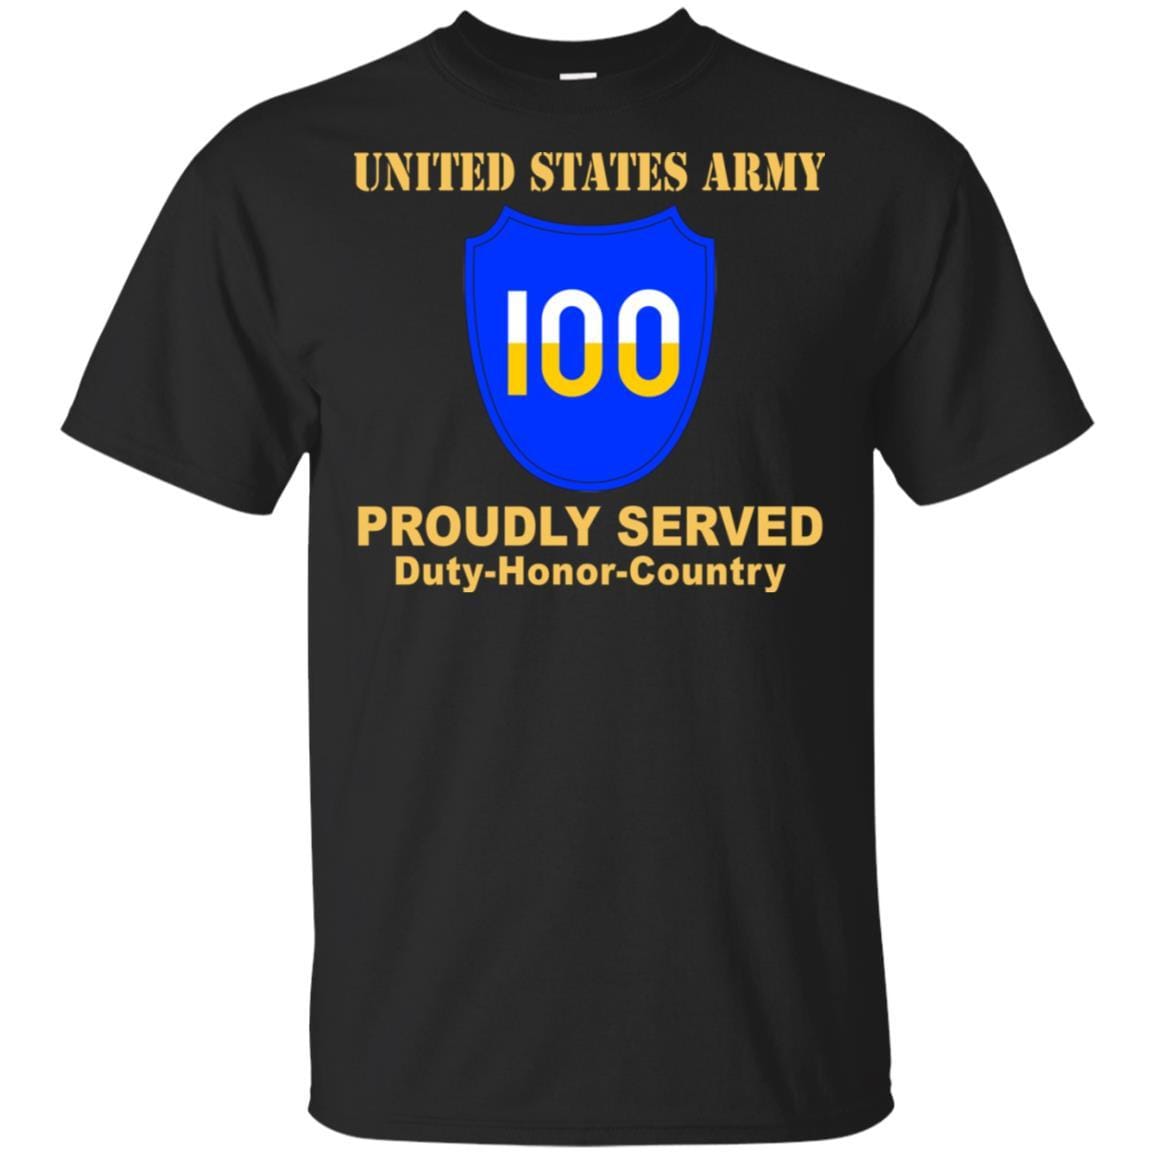 US ARMY 100TH TRAINING DIVISION - Proudly Served T-Shirt On Front For Men-TShirt-Army-Veterans Nation